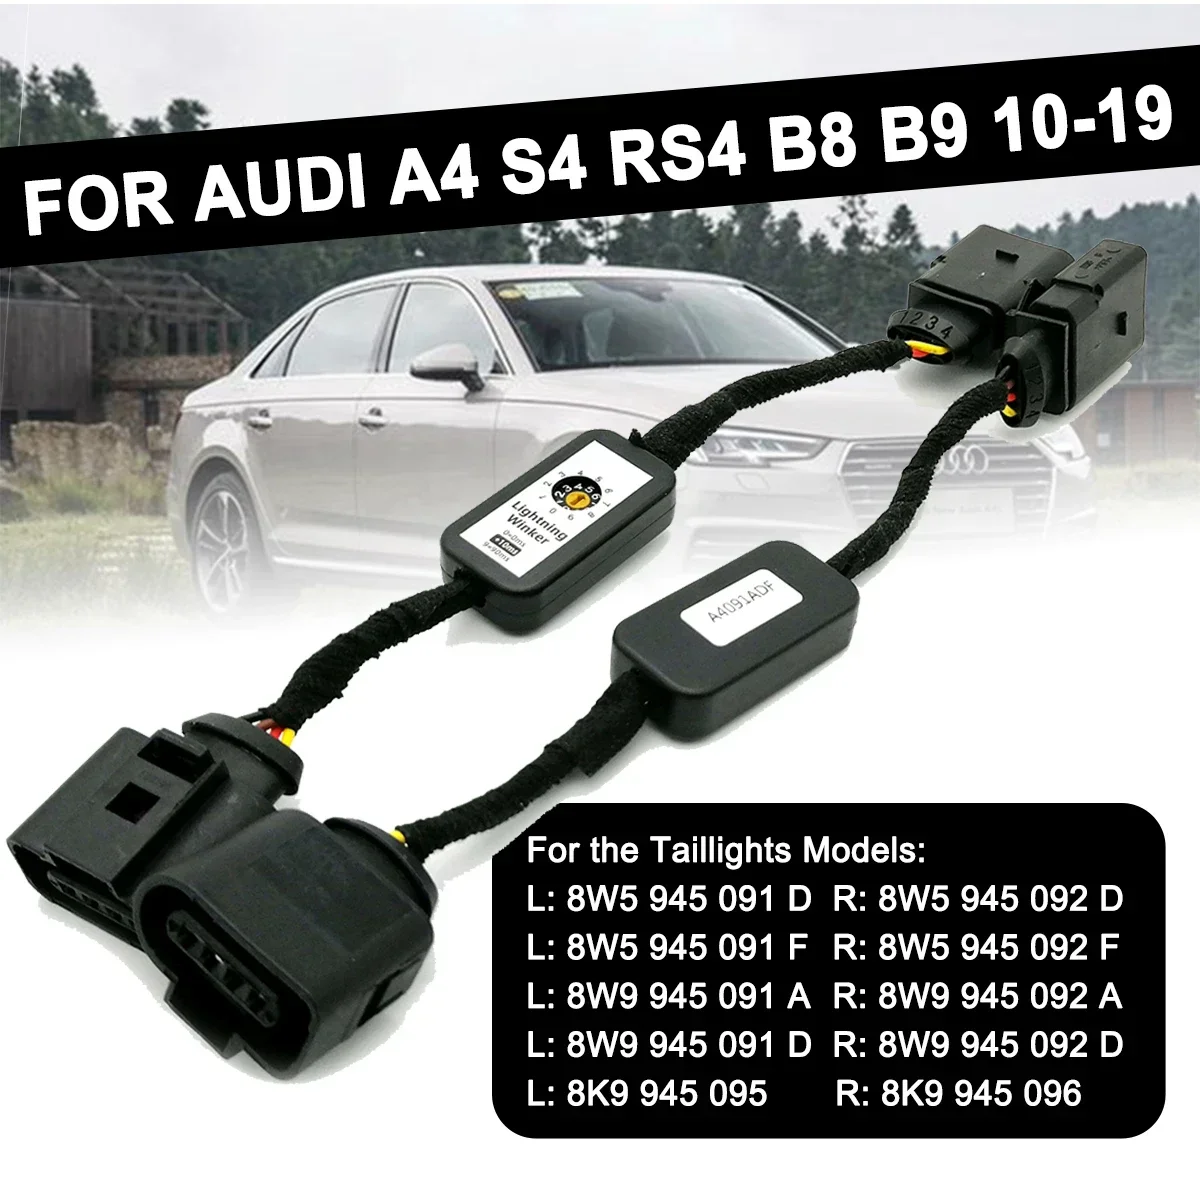 

LED Taillight Add-on Module Cable Dynamic Turn Signal Indicator For Audi A4 S4 RS4 B8 B9 2010 2011 2012 2013 2014 2015 2016-2019